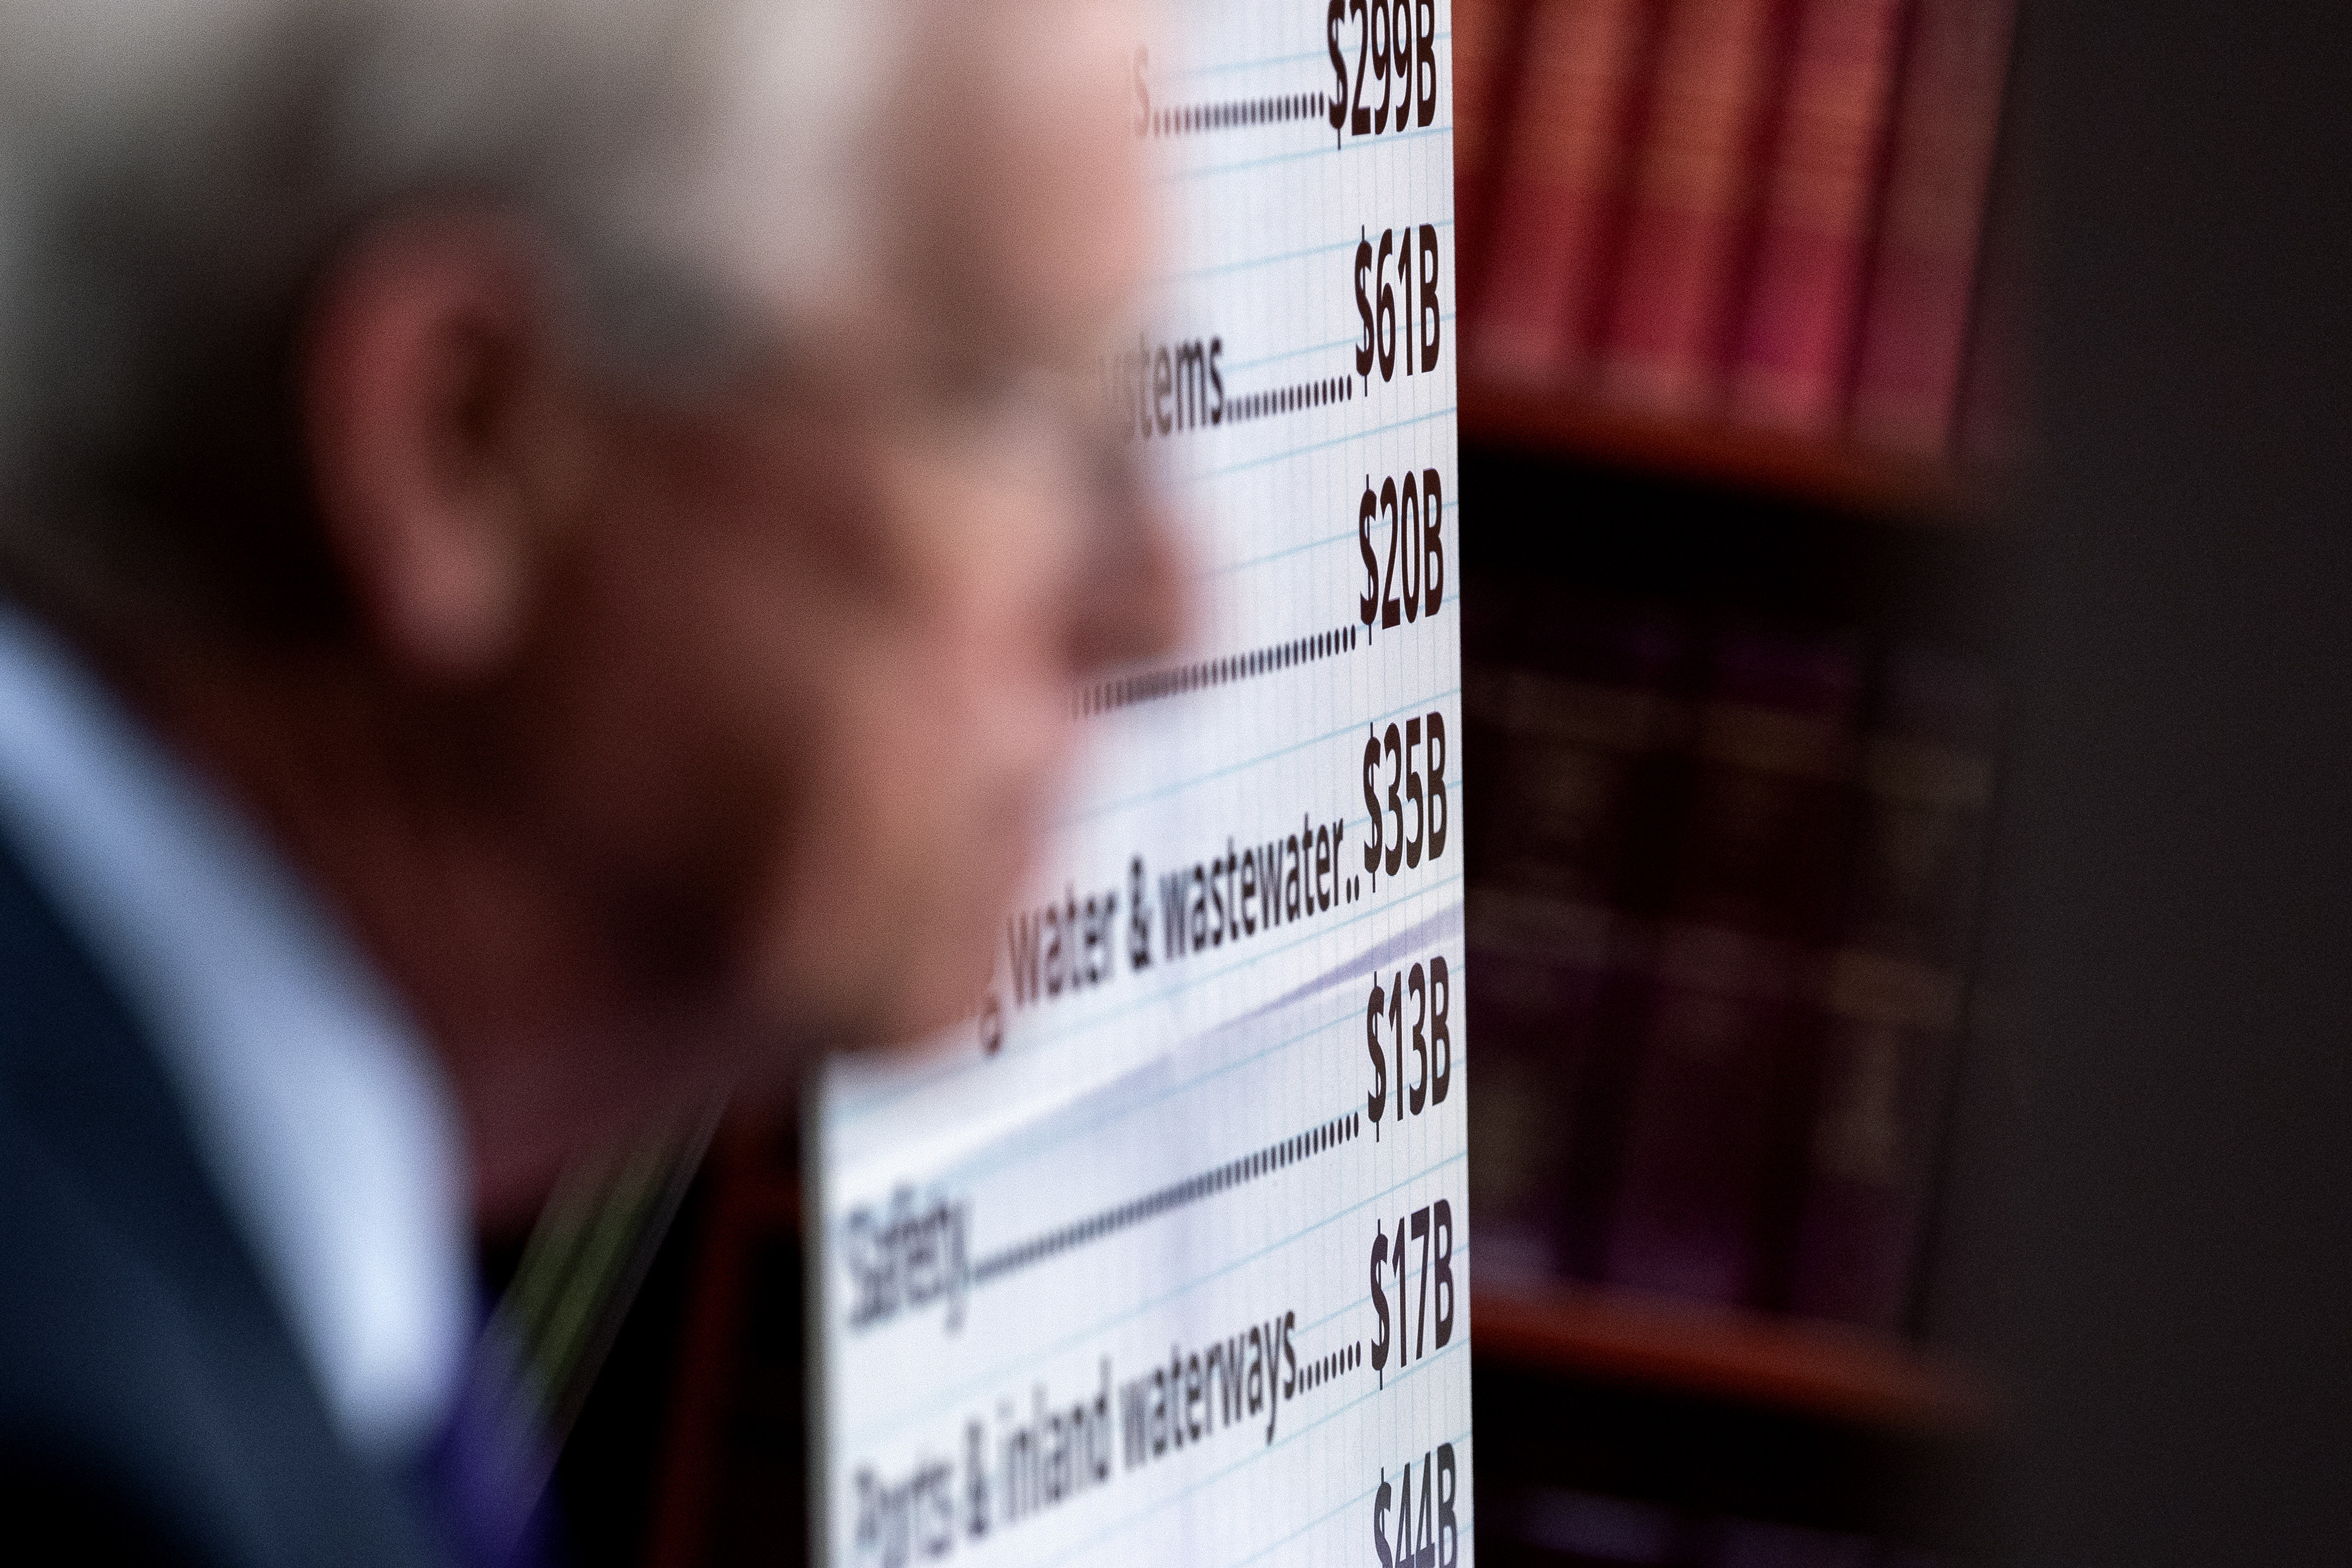 Biden will propose almost doubling the capital gains tax rate for wealthy individuals to 39.6 per cent to help pay for social spending that addresses long-standing inequality. Photo: Bloomberg